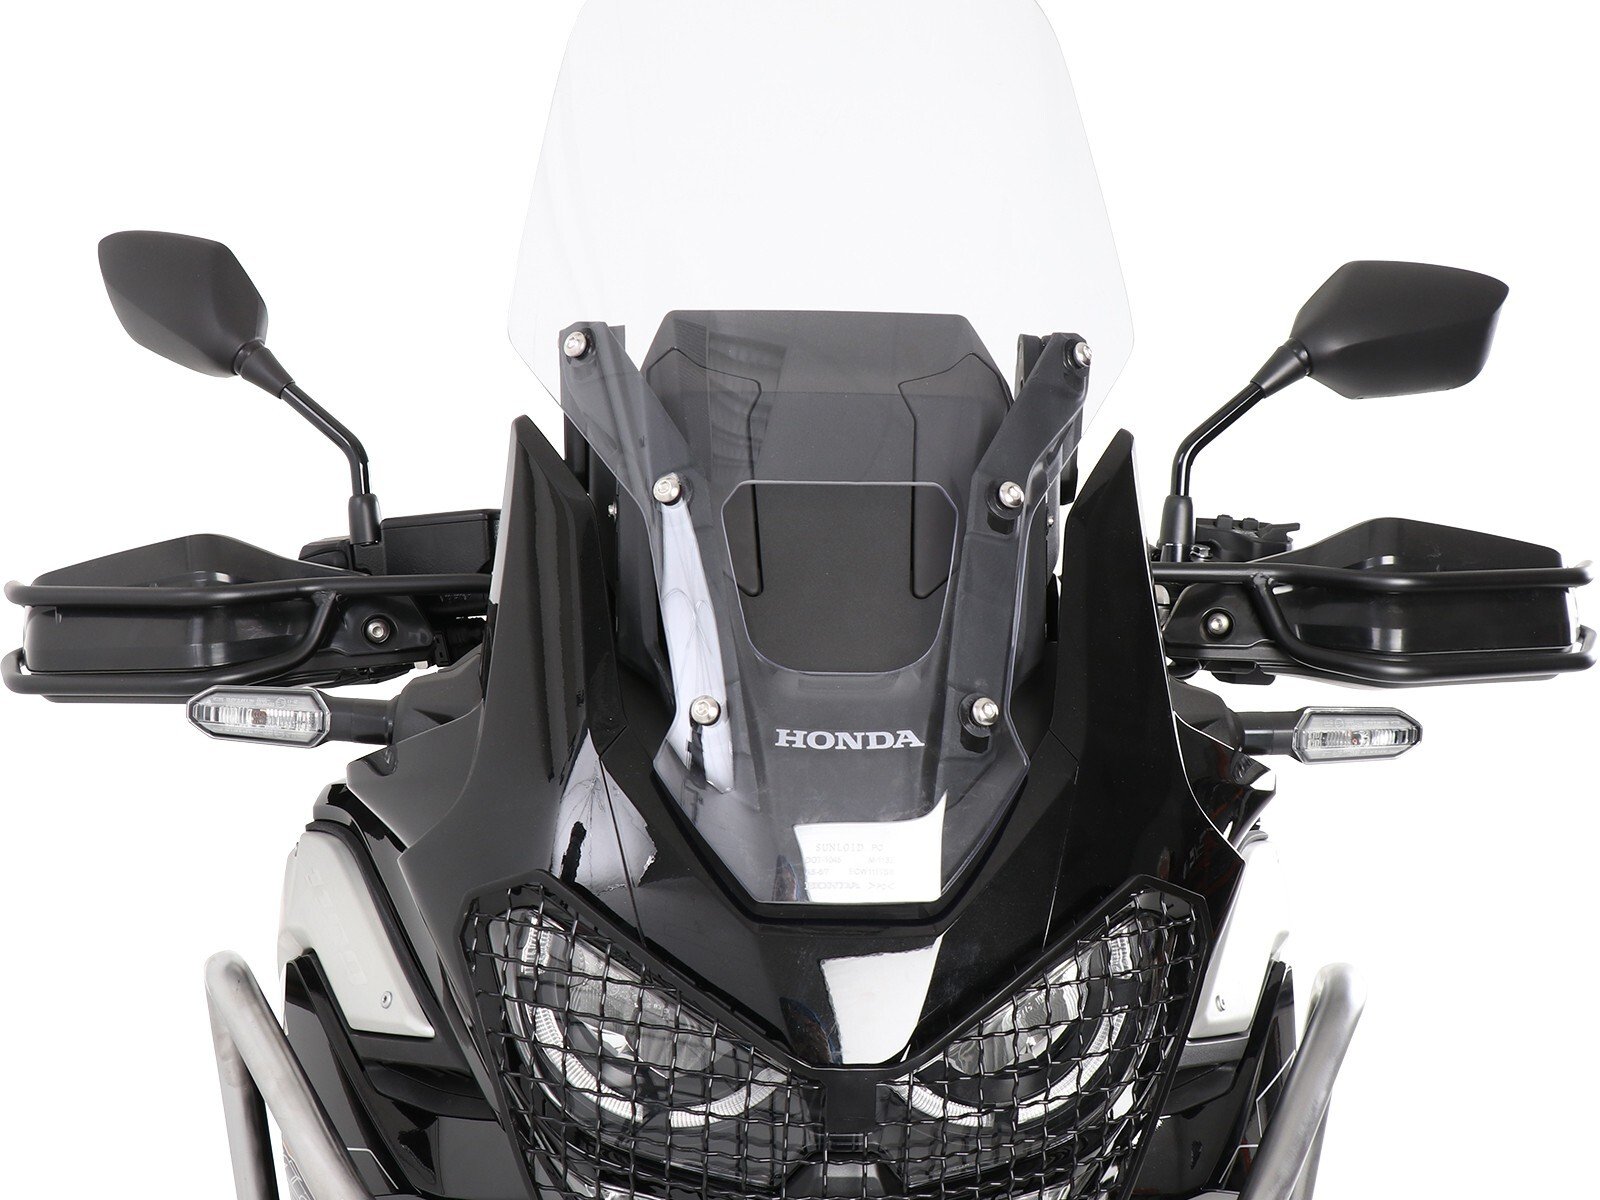 Hepco HAND GUARD SET - BLACK FOR HONDA CRF 1100 L AFRICA TWIN (2019-)